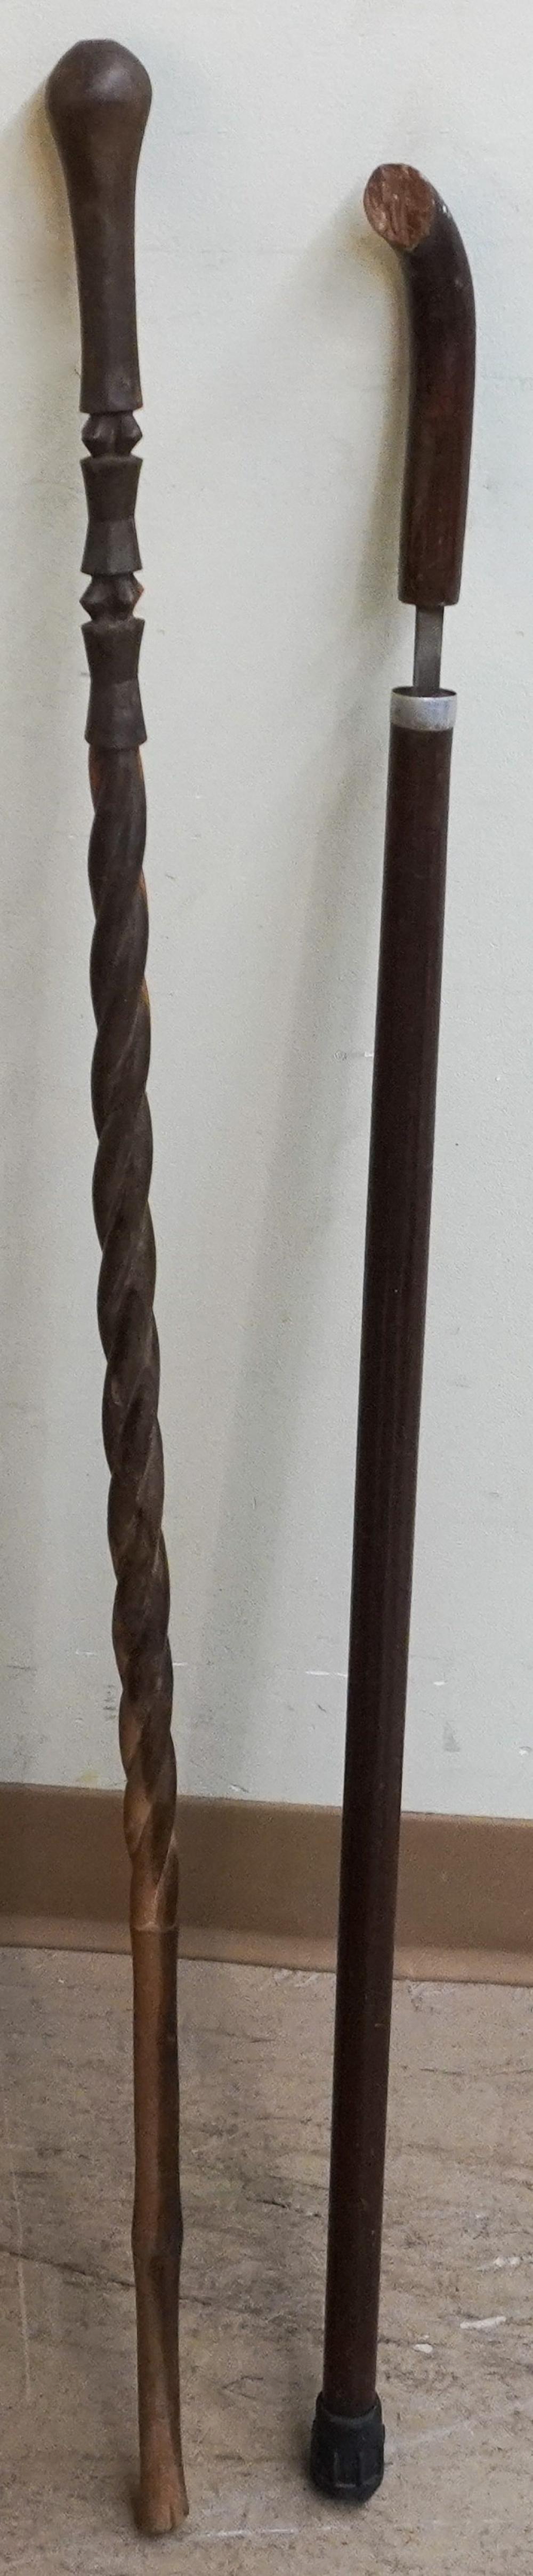 TWO CARVED WOOD CANES, ONE WITH